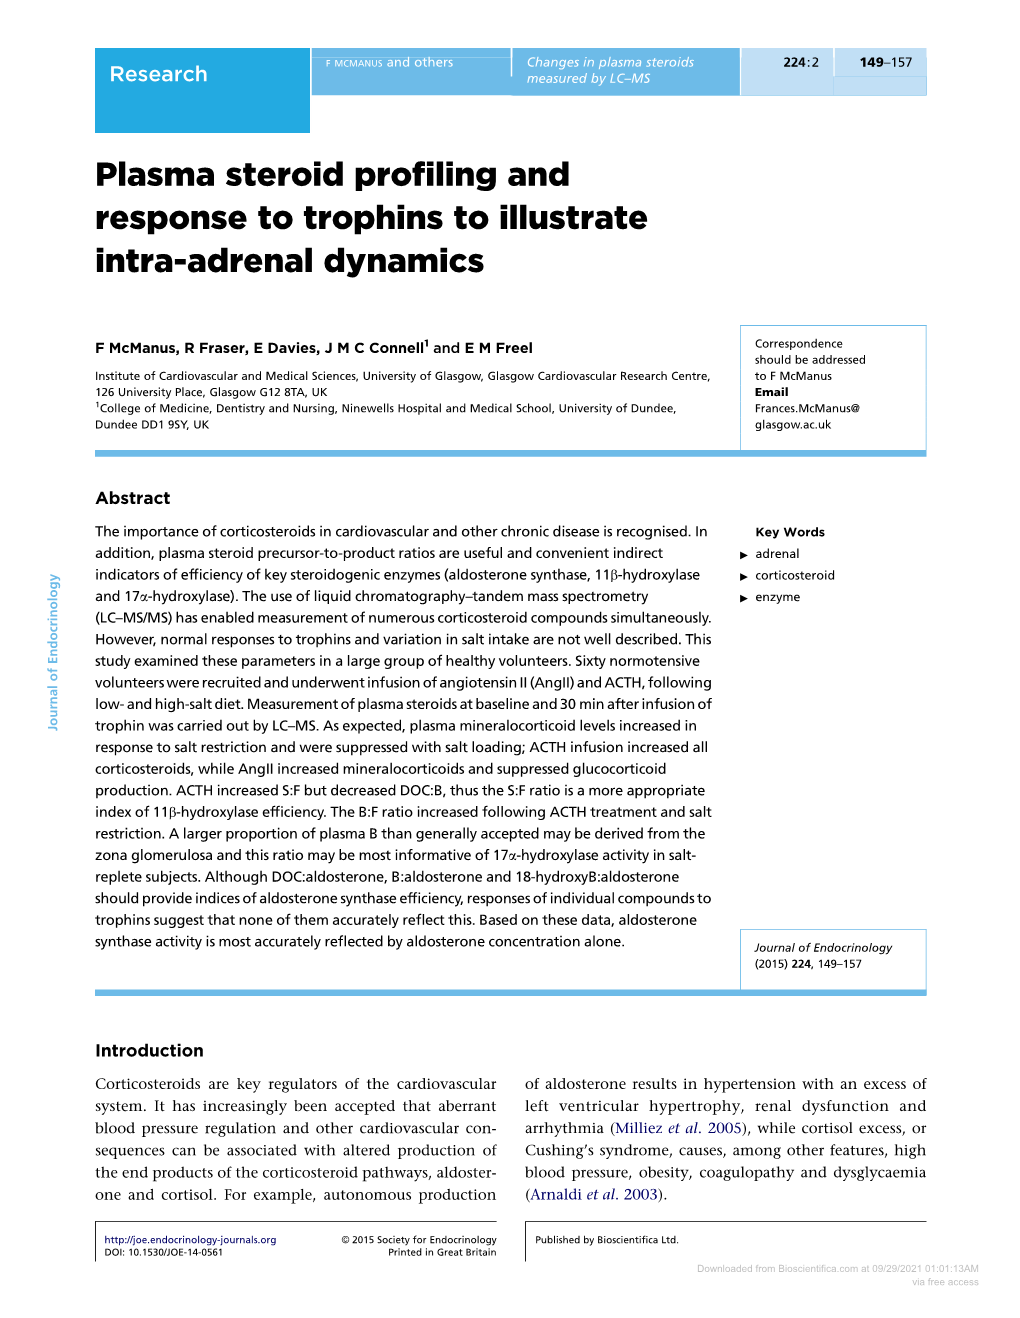 Plasma Steroid Profiling and Response to Trophins to Illustrate Intra